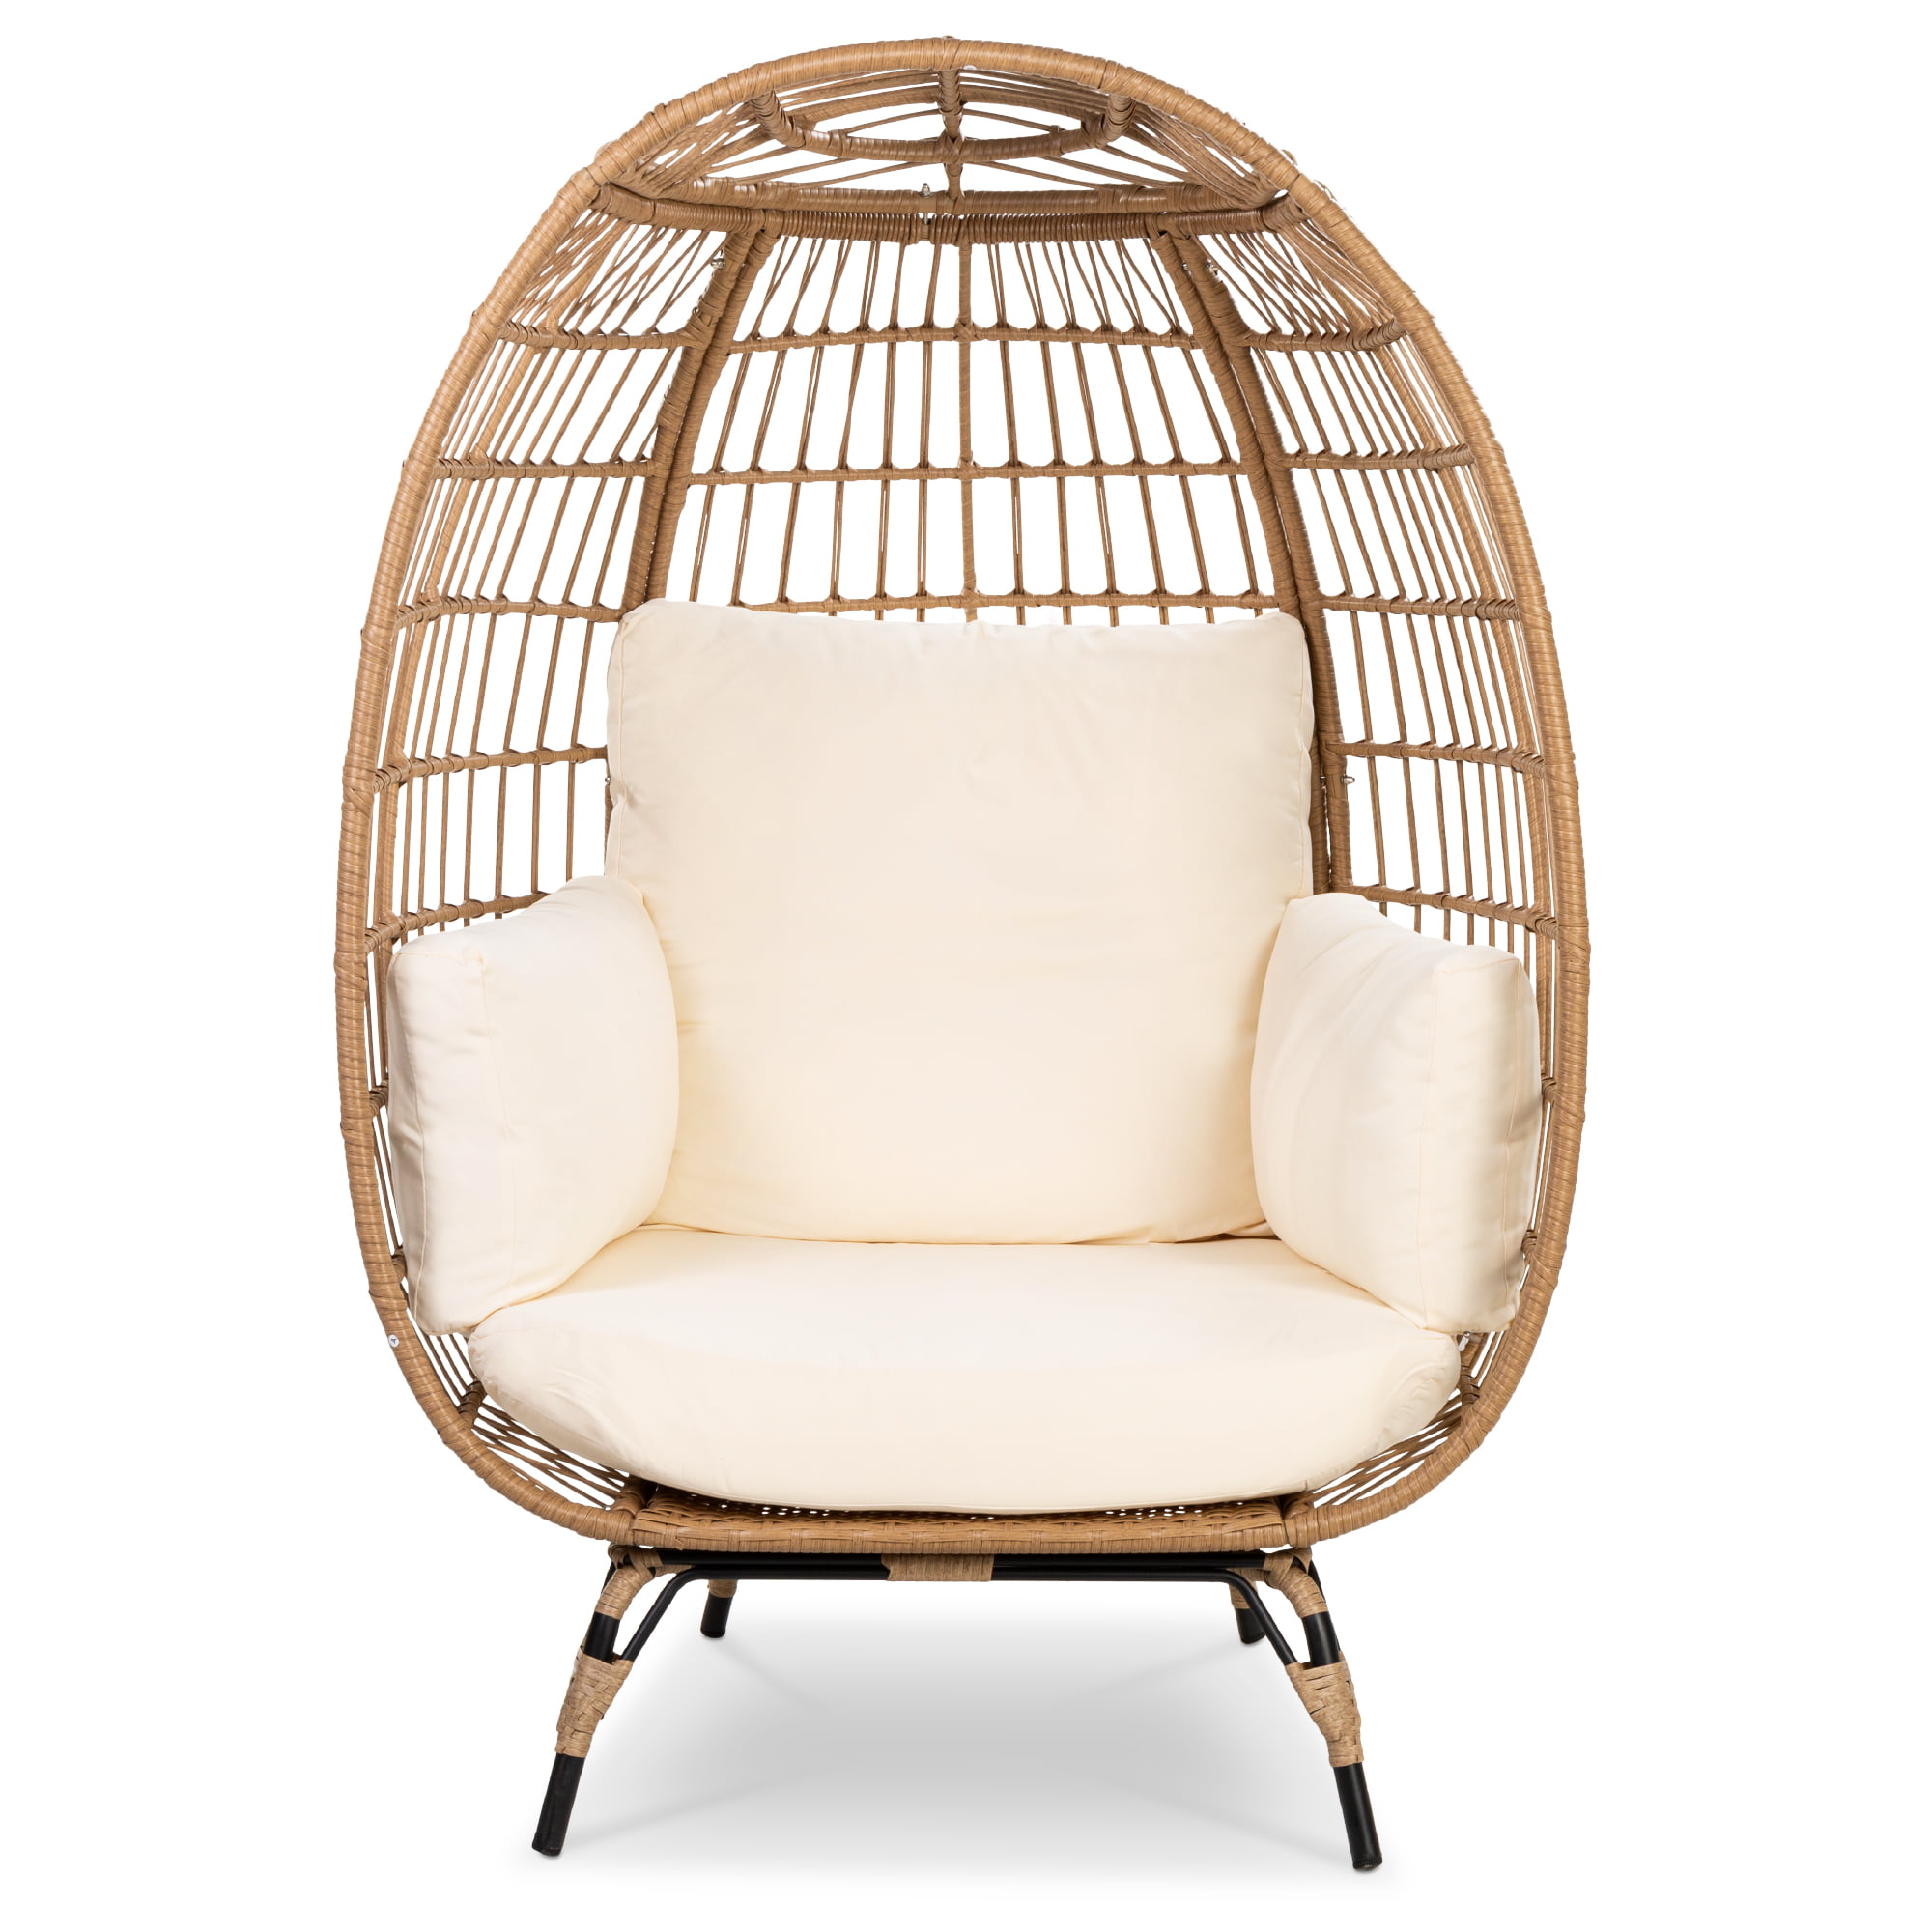 Best Choice Products Wicker Egg Chair Oversized Indoor Outdoor Patio Lounger W Steel Frame 440lb Capacity Ivory Walmart Com Walmart Com